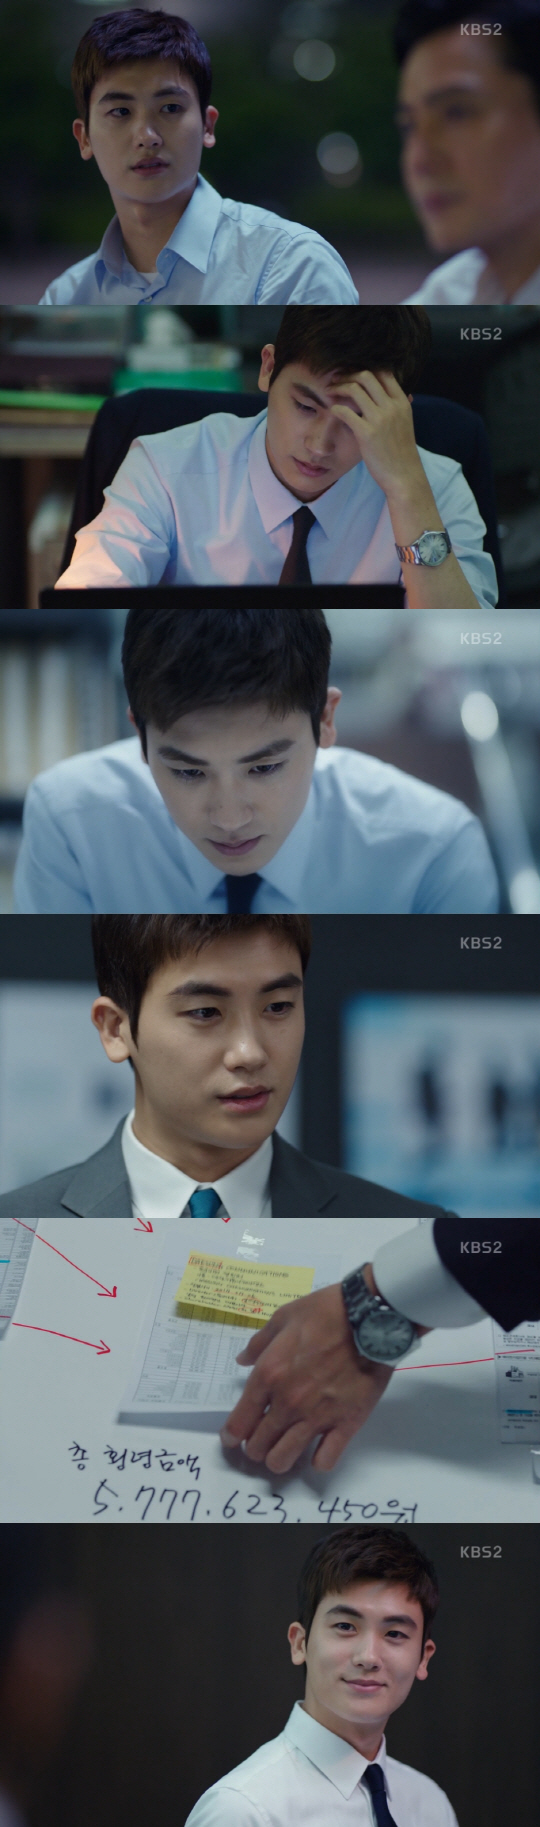 Sometimes there are fakes that are more real than real, and there is a real one that gets so used to it or is self-confident that it misses the core.But there are fakes that are not real, so desperate that they can see through the core.It is the story of Park Hyung-sik (played by Ko Yeon-woo) in KBS 2TV drama Suits (played by Kim Jung-min/directed by Kim Jin-woo/produced monster union, Entermedia Pictures).In the play, Ko Yeon-woo had always dreamed of a lawyer, had the ability to be, but could not be, because he did not give him that the world was an opportunity.Such a late actress met a miraculous opportunity at the end of the cliff: an opportunity to work as a new lawyer at South Koreas top Law Firm.He was desperate, and he had a chance to get rid of it, and every day he was found out, Danger is growing up as a lawyer in it.The 8th episode of Suits broadcast on the 17th showed the growth of this high-ranking actor implicitly and impactfully.It grasped the core of the case of requesting dismissal of forgery employees and found out the large amount of embezzlement of large accounting corporations.Distribution that does not bend beliefs even though it is pushed to the dismissal Danger, not just seeing events, but seeing people in the case.He showed the same ability and activity more real than a real lawyer.Ko Yeon-woo led the South Koreas top law firm Gang & Ham representative Kang Hae-yeon (Jin Hee-kyung) to the word formal lawyer from today.Now, Ko is no longer a lawyer for gang & ham. He is a formal lawyer.It is natural that Ko Yeon-woo, who showed such excellent ability and unstoppable growth when assisting Choi Kang-seoks work as a lawyer, is expected to perform what he will do when he becomes a regular lawyer.From the standpoint of Ko Yeon-woo, Suits is a kind of growth drama, which is also a counter-electrode that overturns the preconceptions that are framed.This is a storyline that can draw consensus, but the character itself, with its genius matching king, is not common: it must contain both opposite aspects.The role of the actor is an important role.The performance of actor Park Hyung-sik in Suits is worth noting.It shows the sense of flexibly changing characters according to the situation change, the concentration of acting ability that leads to the audiences empathy and immersion, and the excellent expressive power that surrounds all of these.As the drama grows more and more, the deepening acting comes to a greater charm.Park Hyung-sik, an actor in Suits, is a brilliant and attractive reason for viewers.